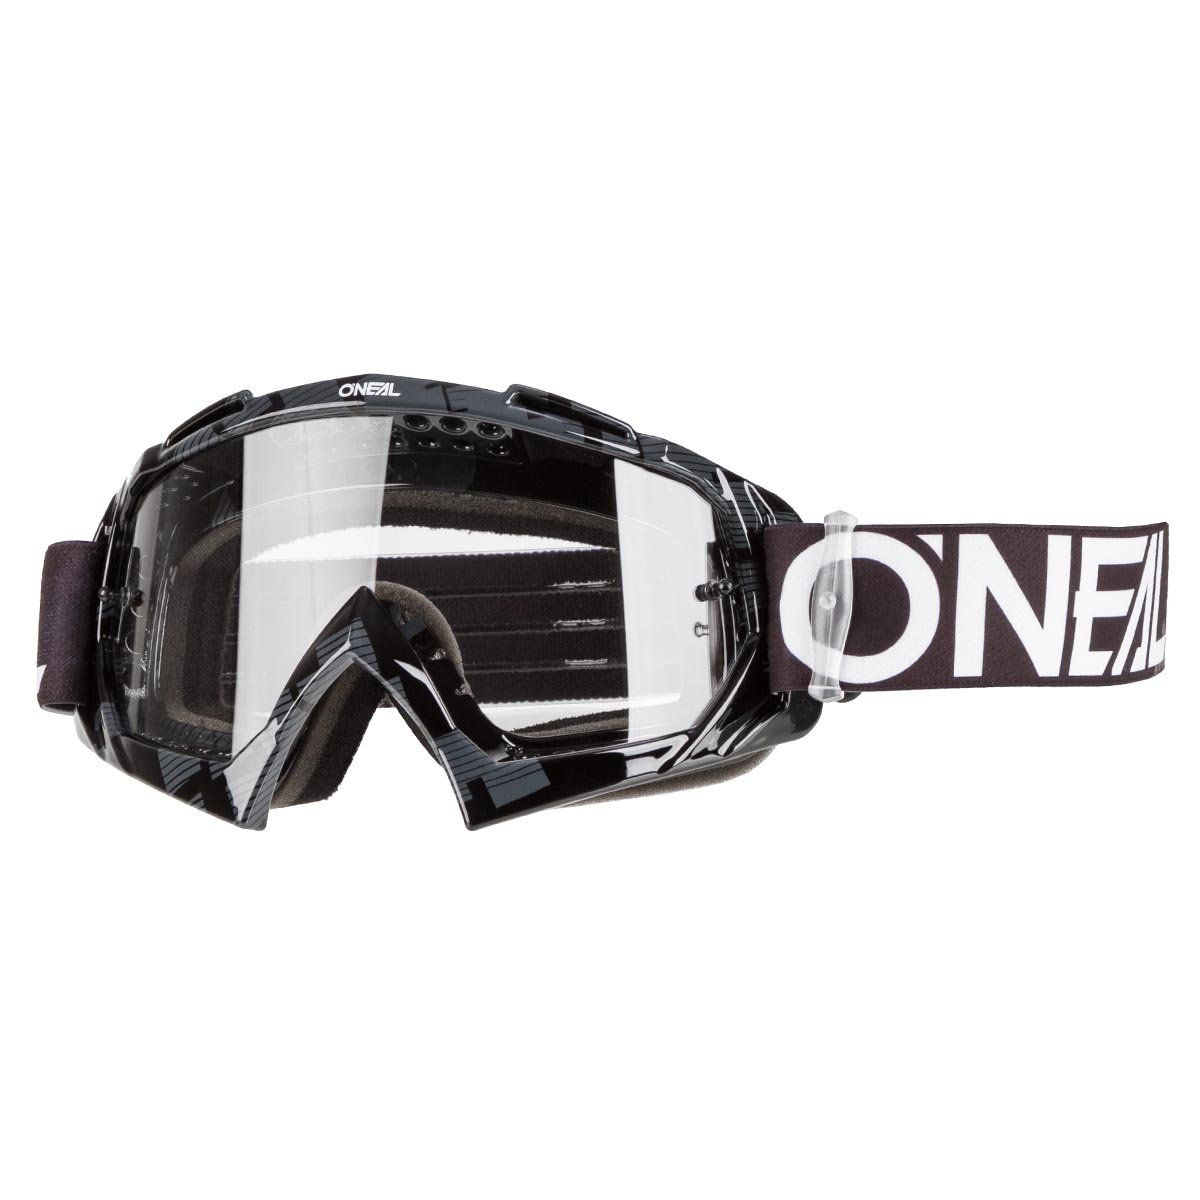 O 'Neal Spare Lens remplacement vitre pour b50 goggle noir/clair ONEAL 